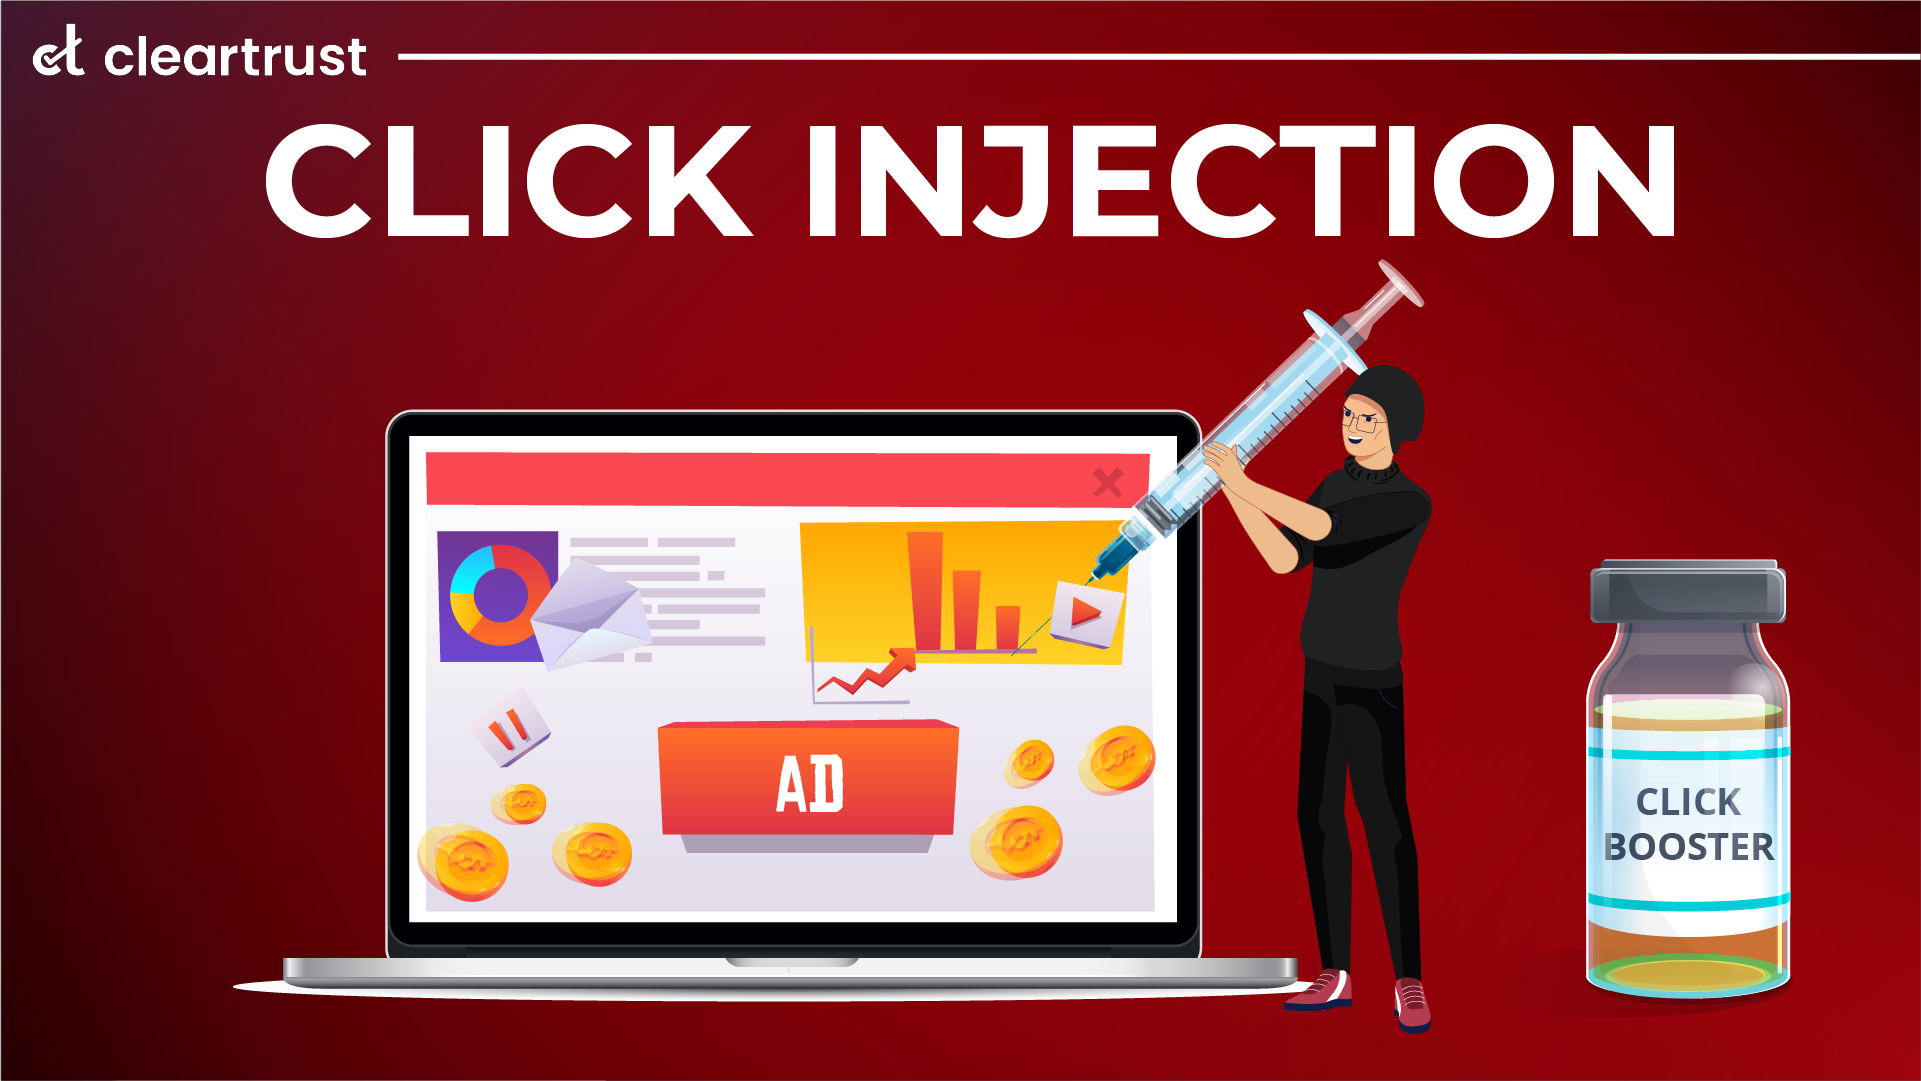 Click Injection - Forced ad clickings from bad actors